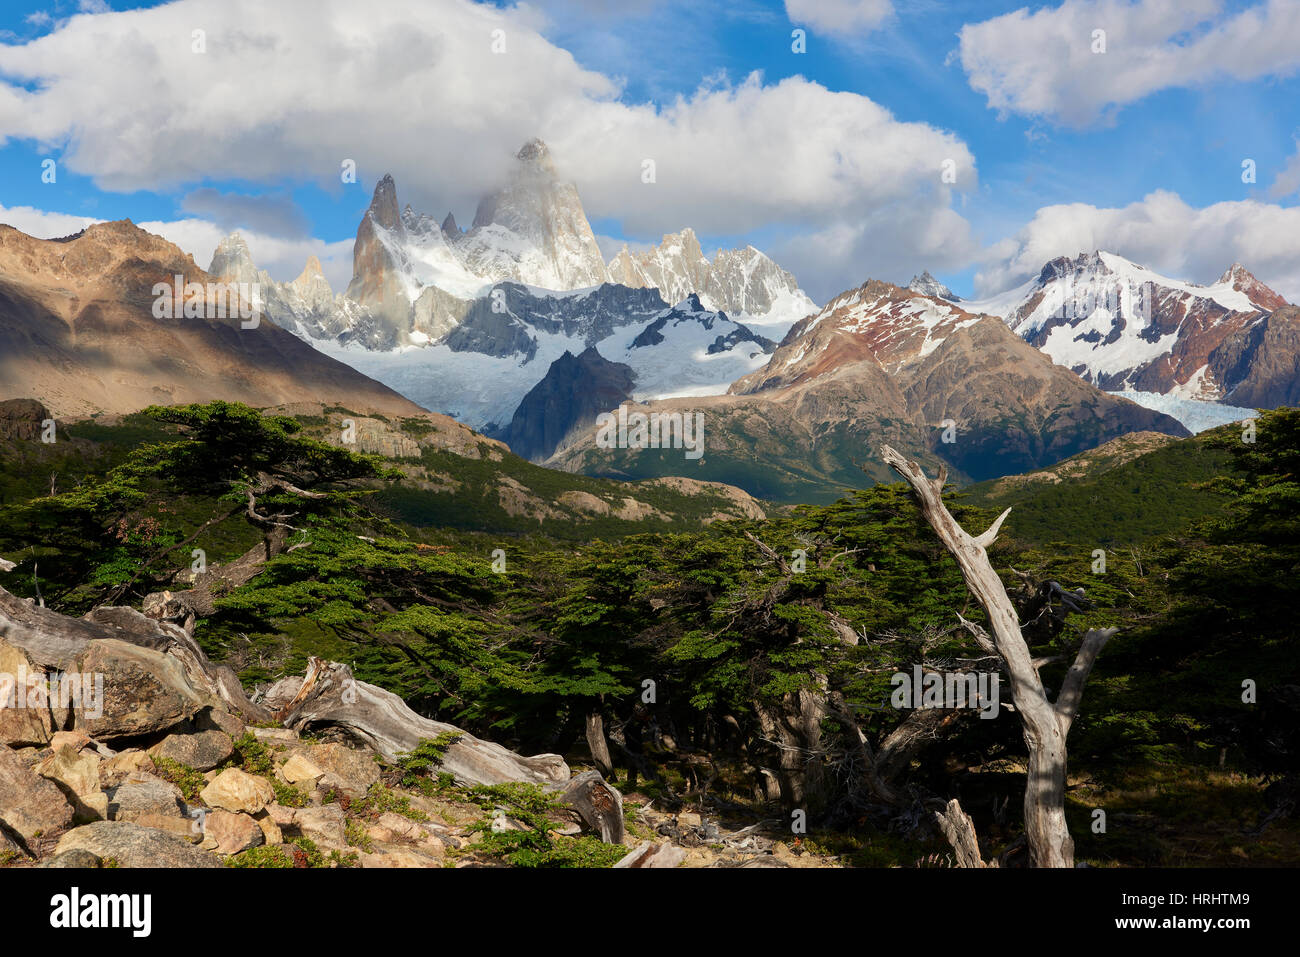 Wide angle landscape featuring Monte Fitz Roy in the background and tree in the foreground, Patagonia, Argentina Stock Photo